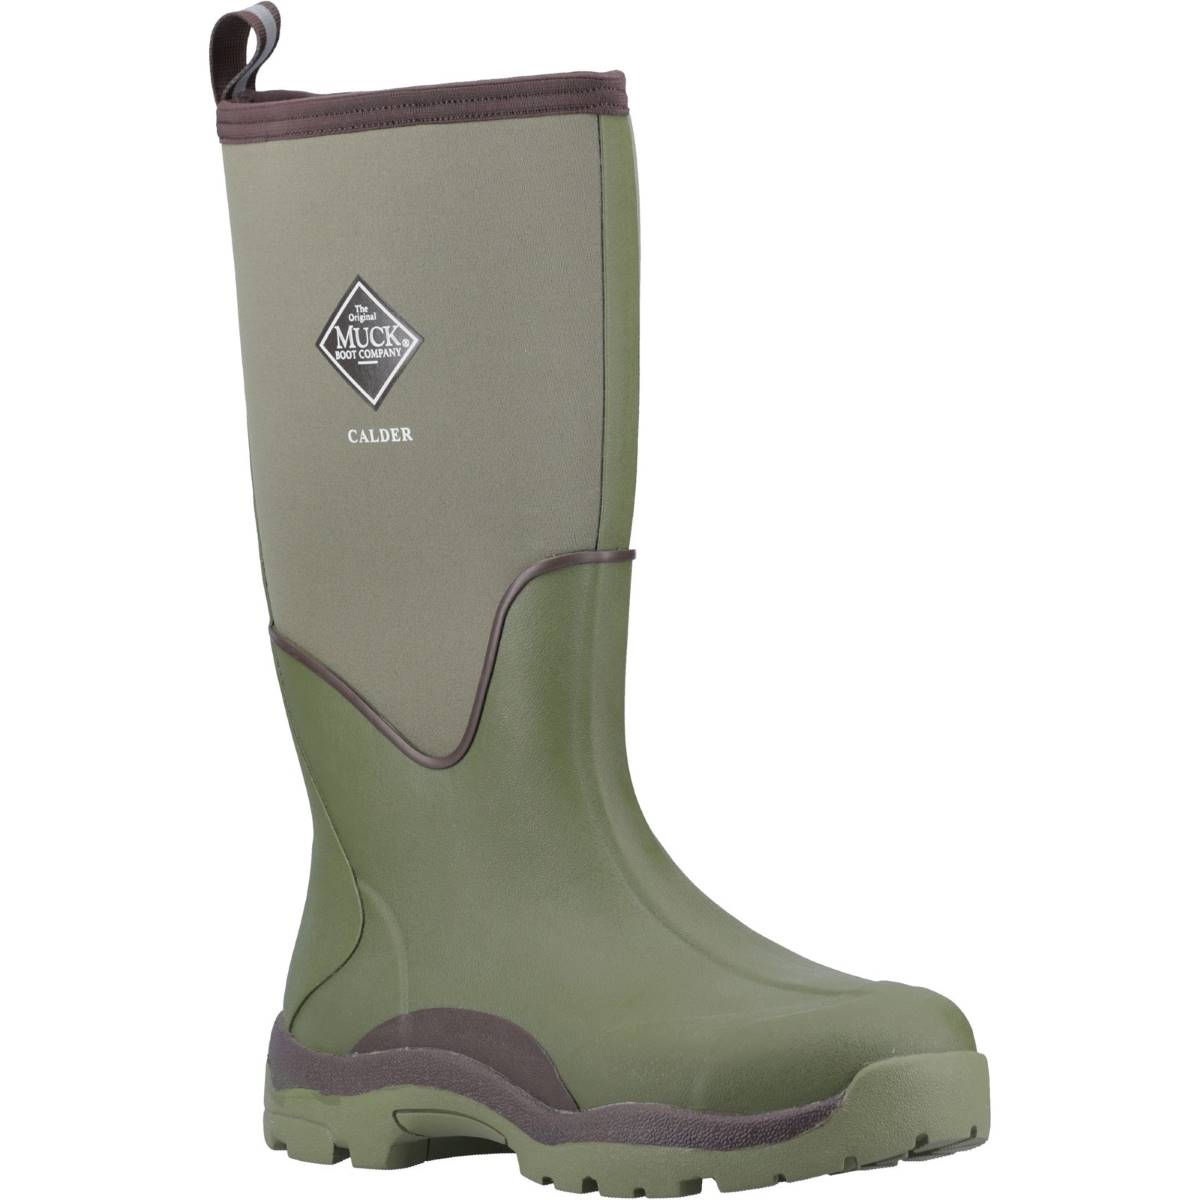 Muck Boots Calder Olive Green Mens Wellingtons MCDM300 in a Plain Rubber in Size 8